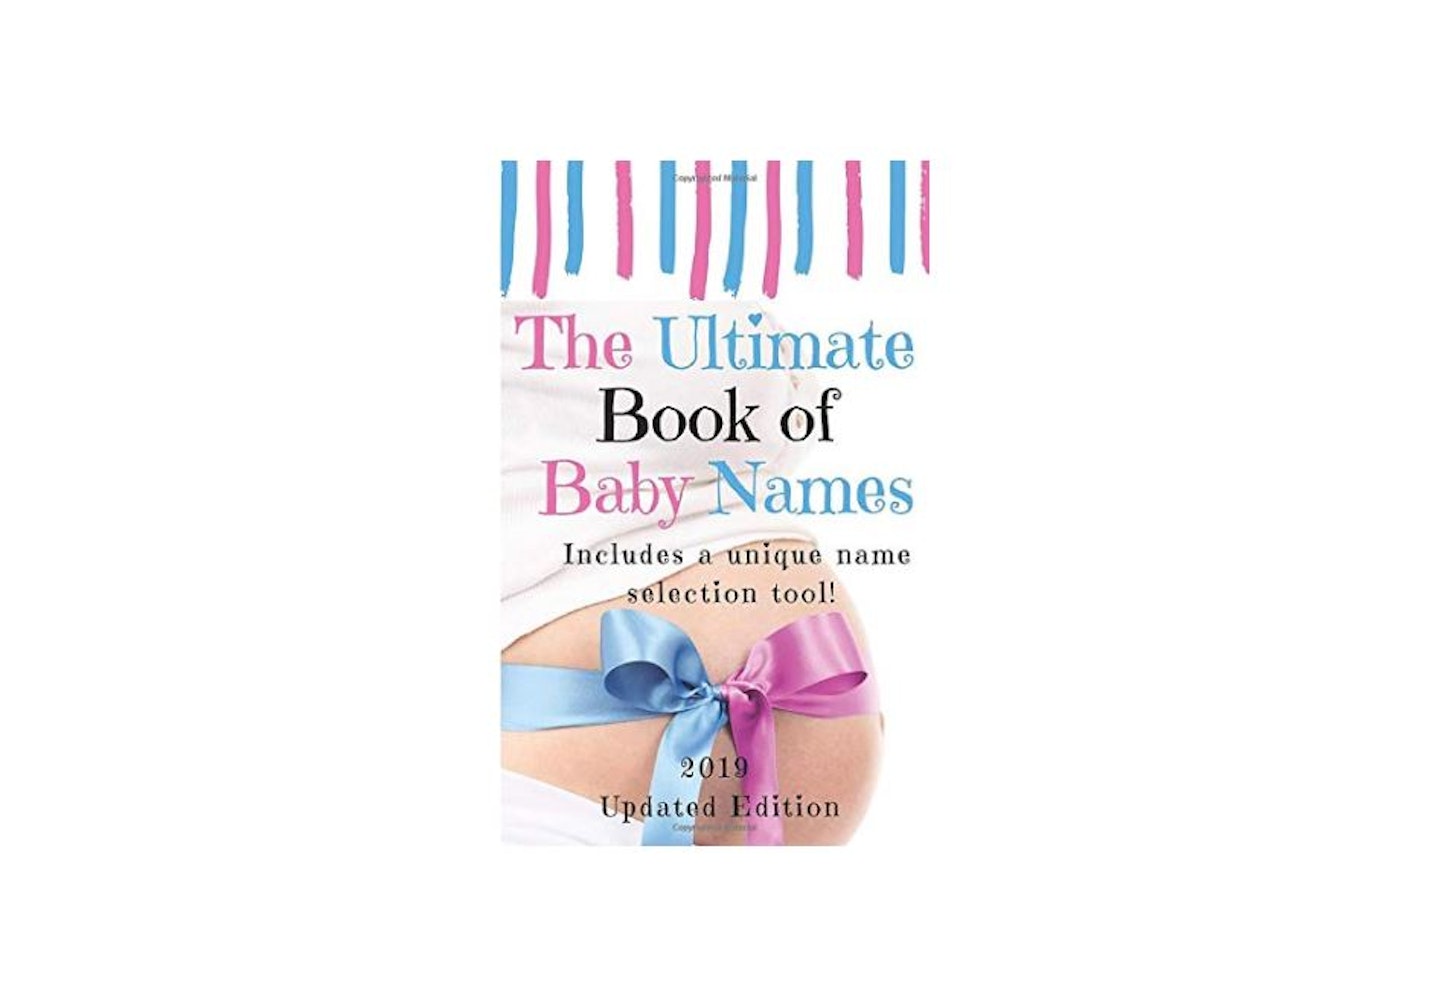 The Ultimate Book of Baby Names, £5.99